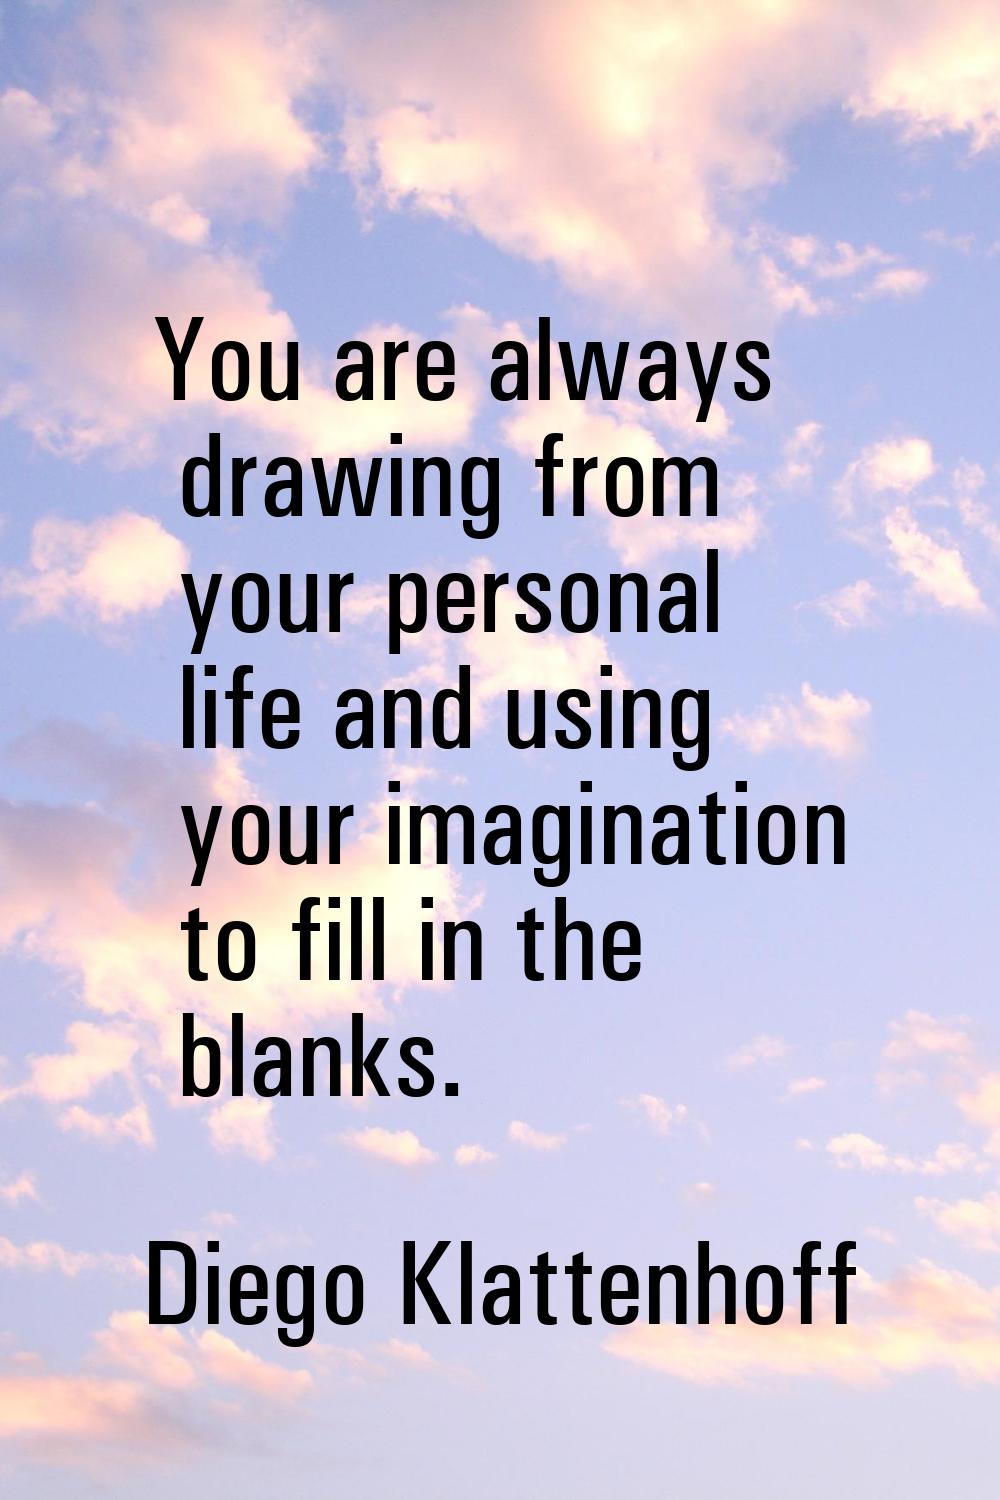 You are always drawing from your personal life and using your imagination to fill in the blanks.